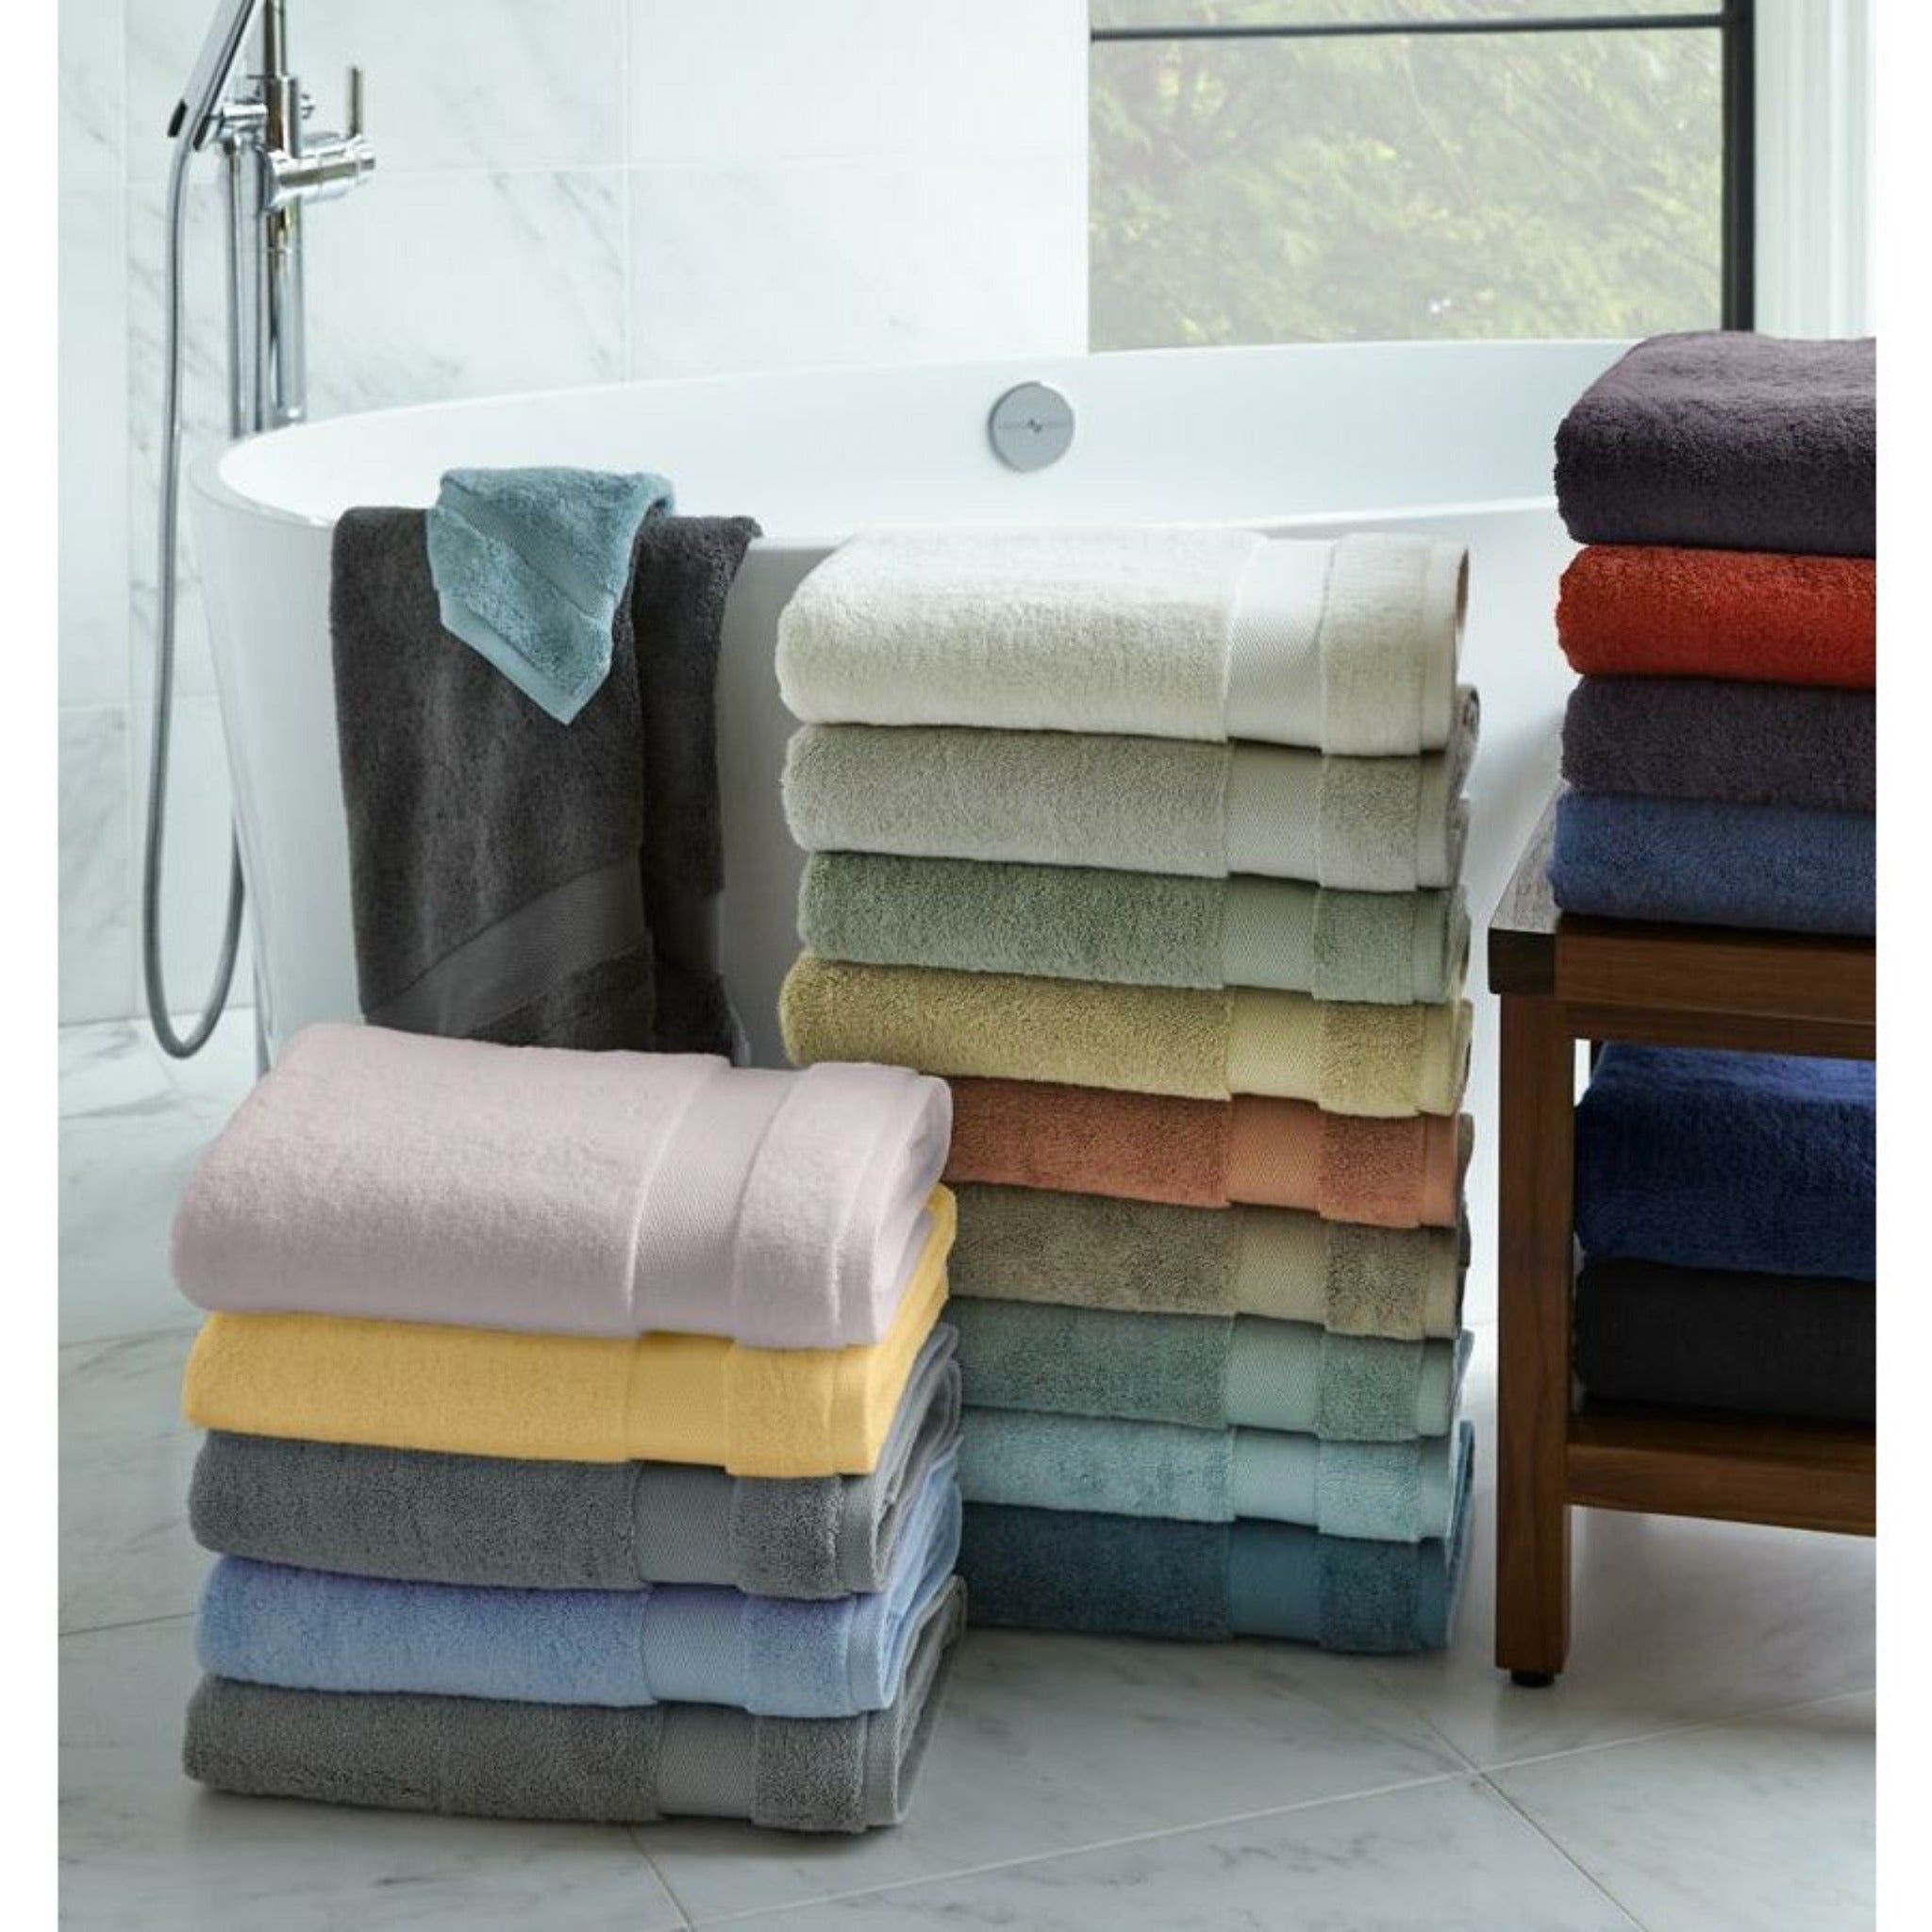 Heritage Antimicrobial Towel Collection